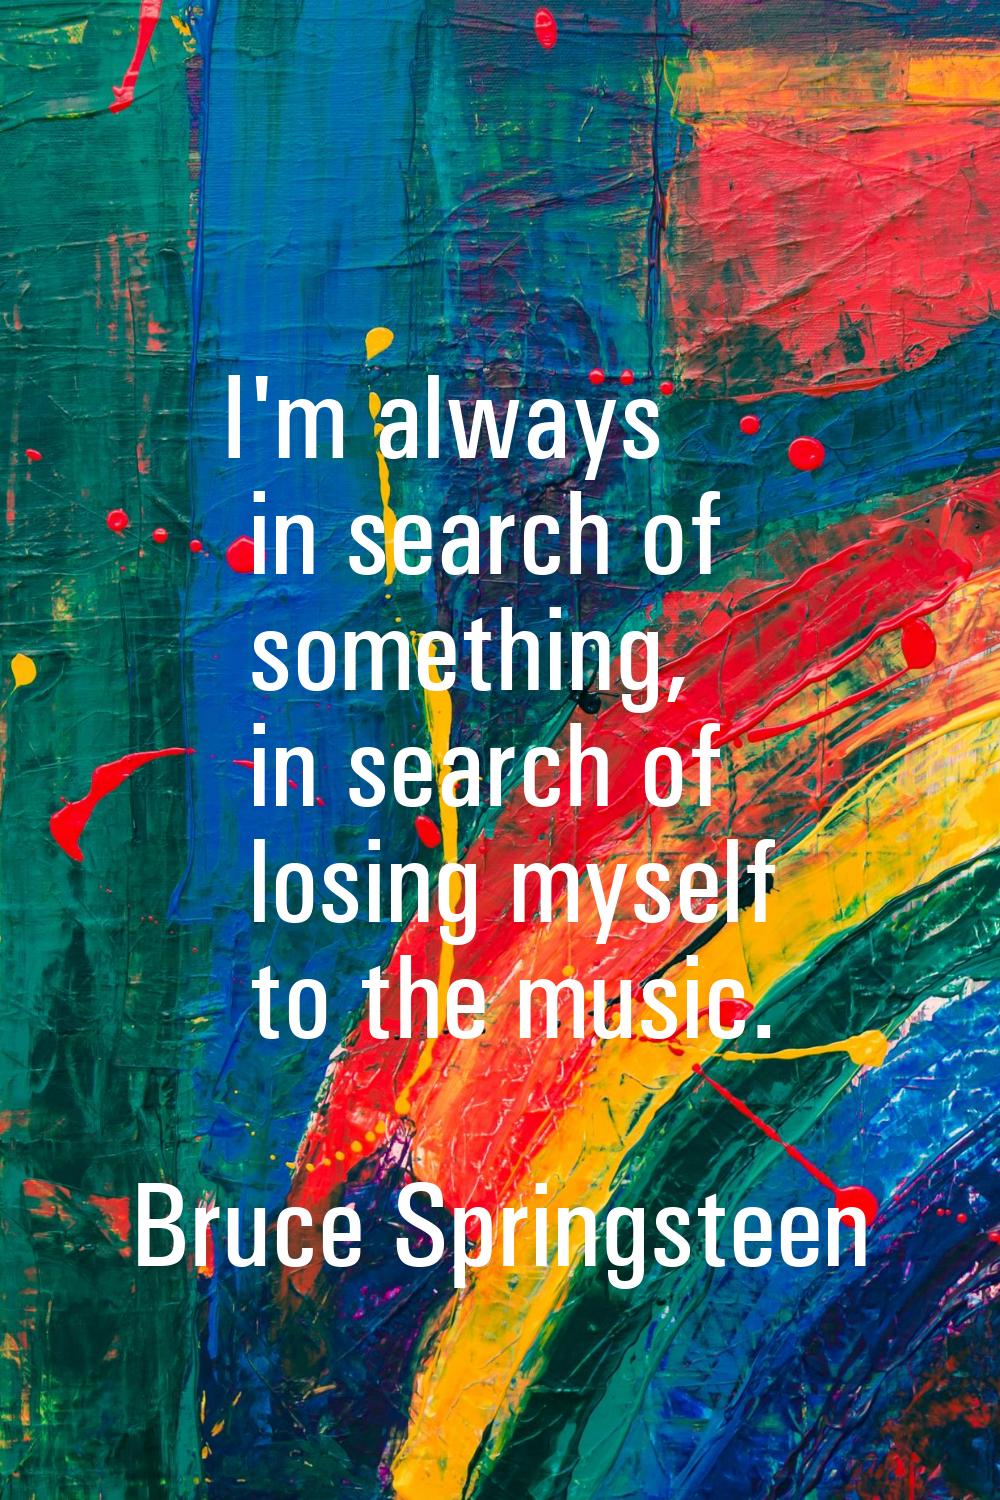 I'm always in search of something, in search of losing myself to the music.